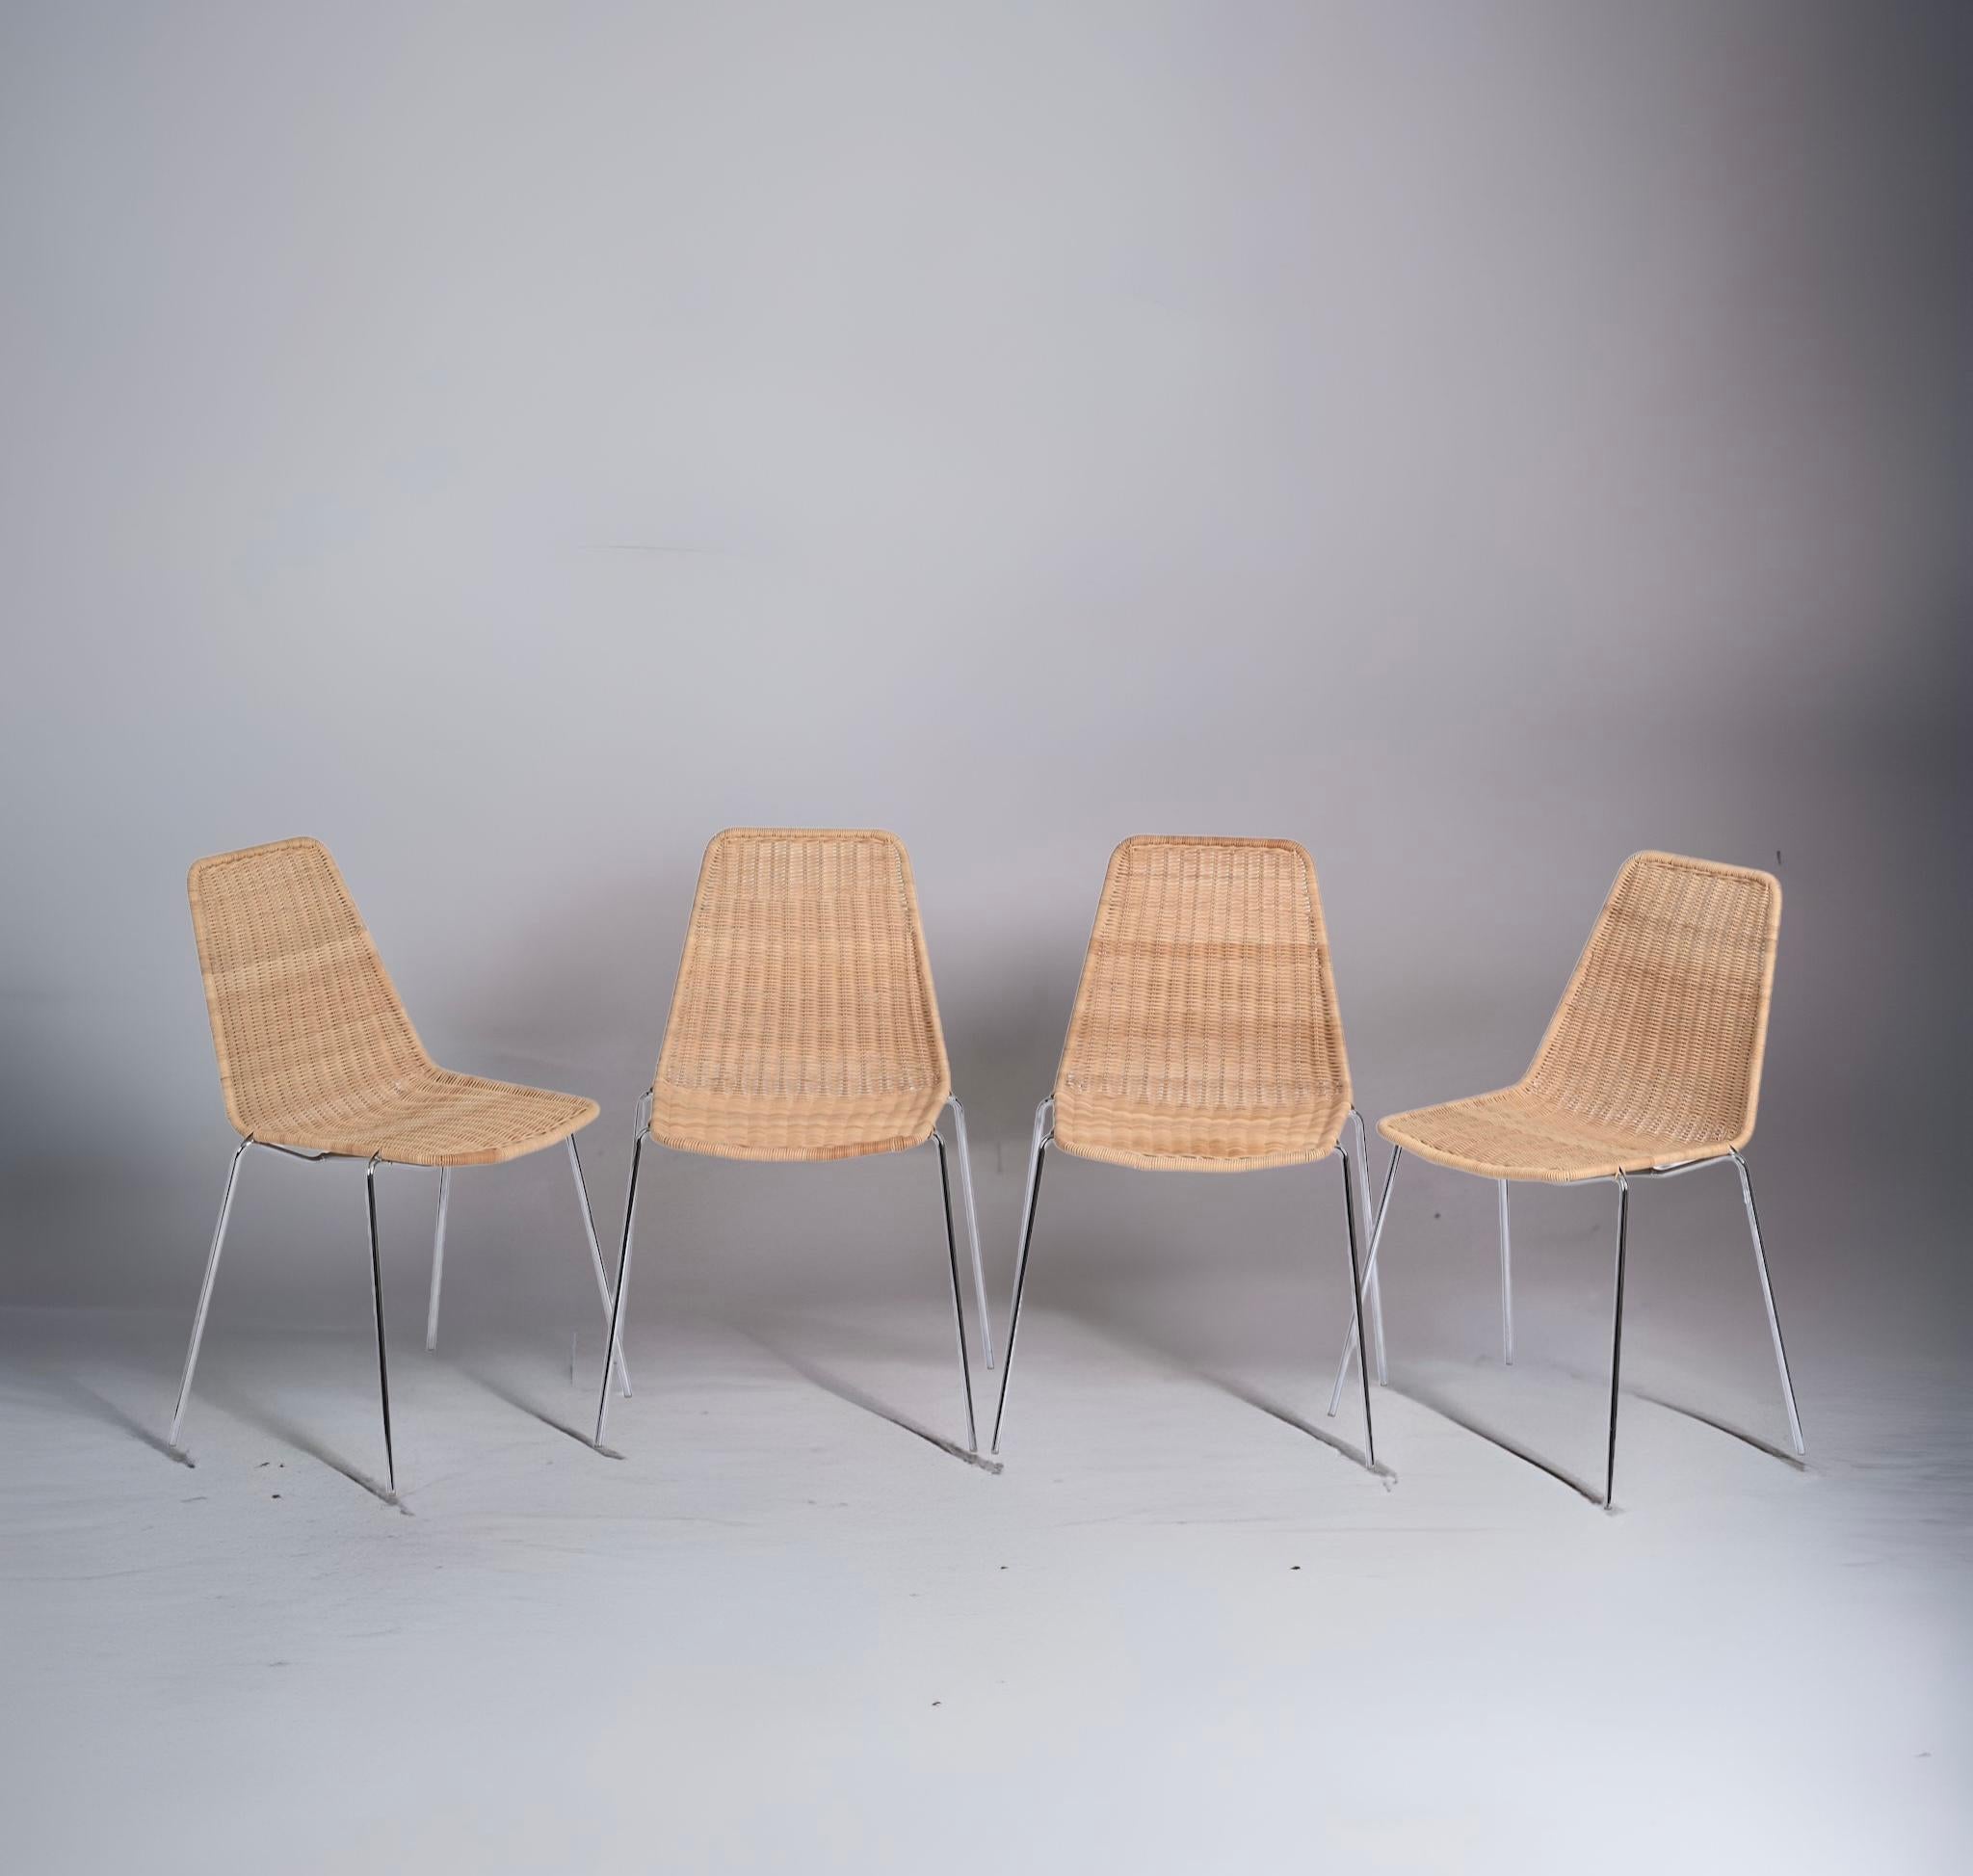 Beautiful midcentury set of four wicker and chromed metal Italian chairs. These amazing pieces were produced in Italy during the 1970s and attributed to designers Franco Campi e Carlo Graffi.

Each seat and back are made of hand-woven rattan with